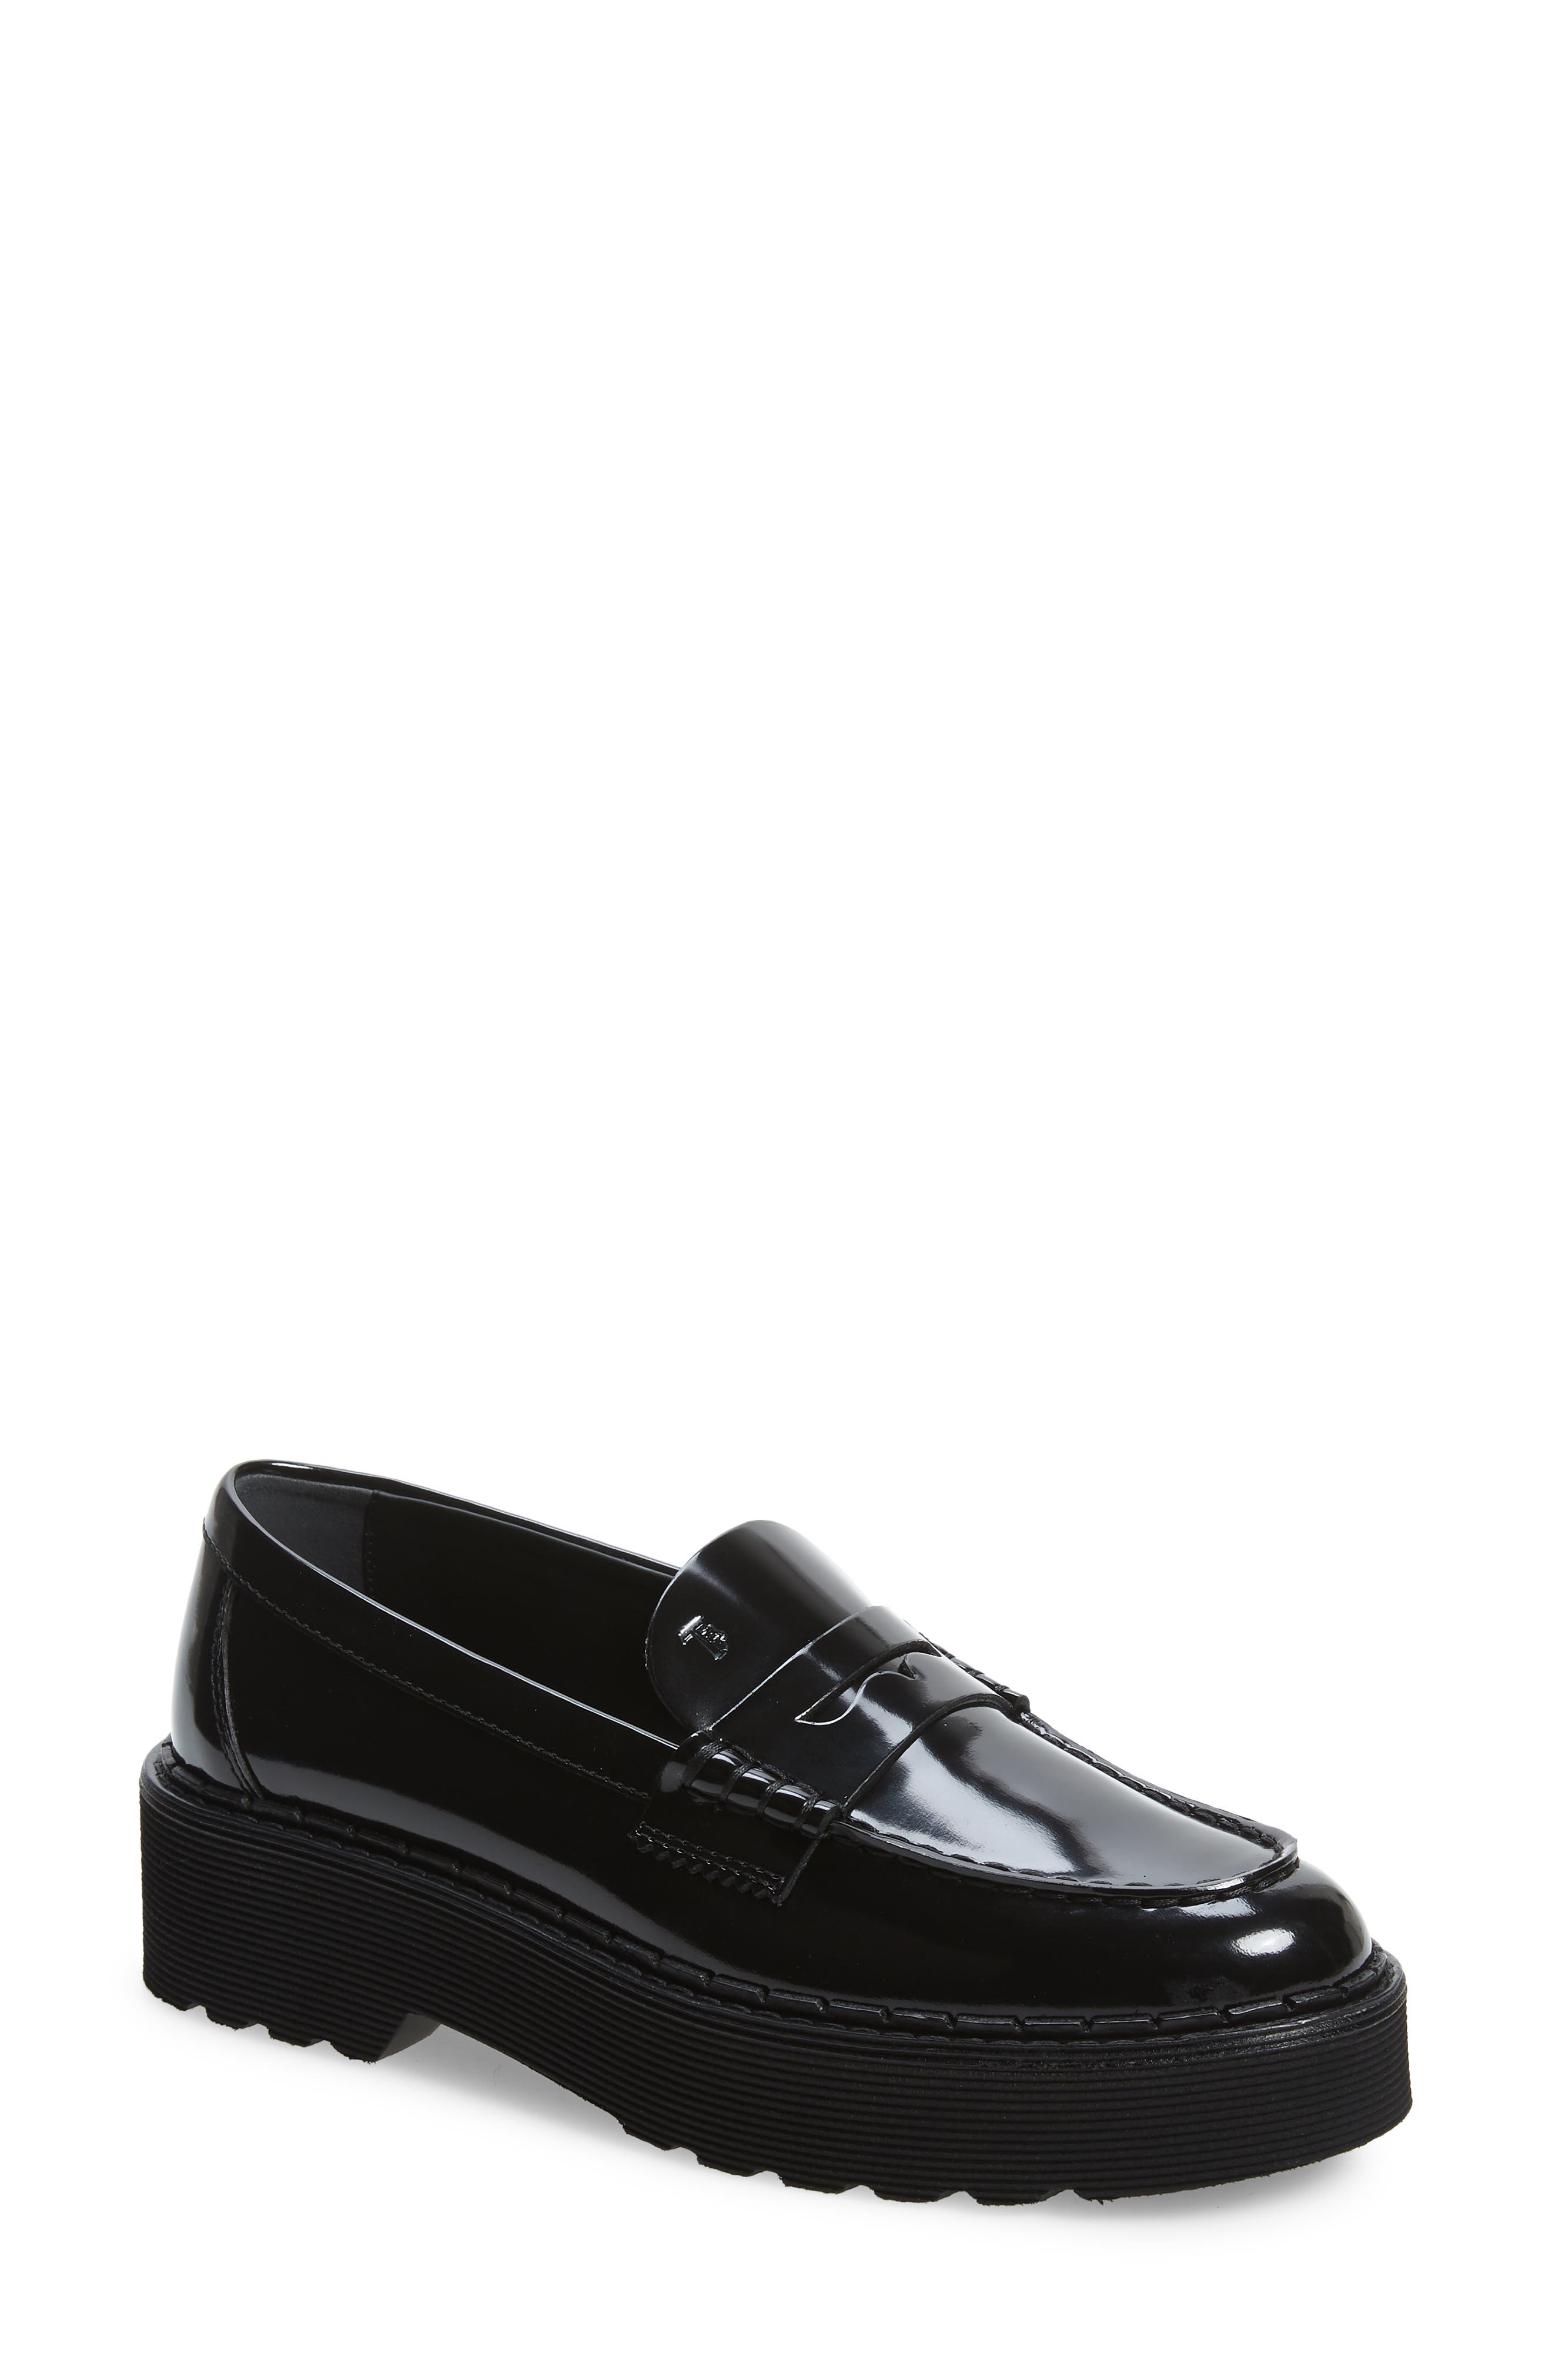 tods shoes online sale